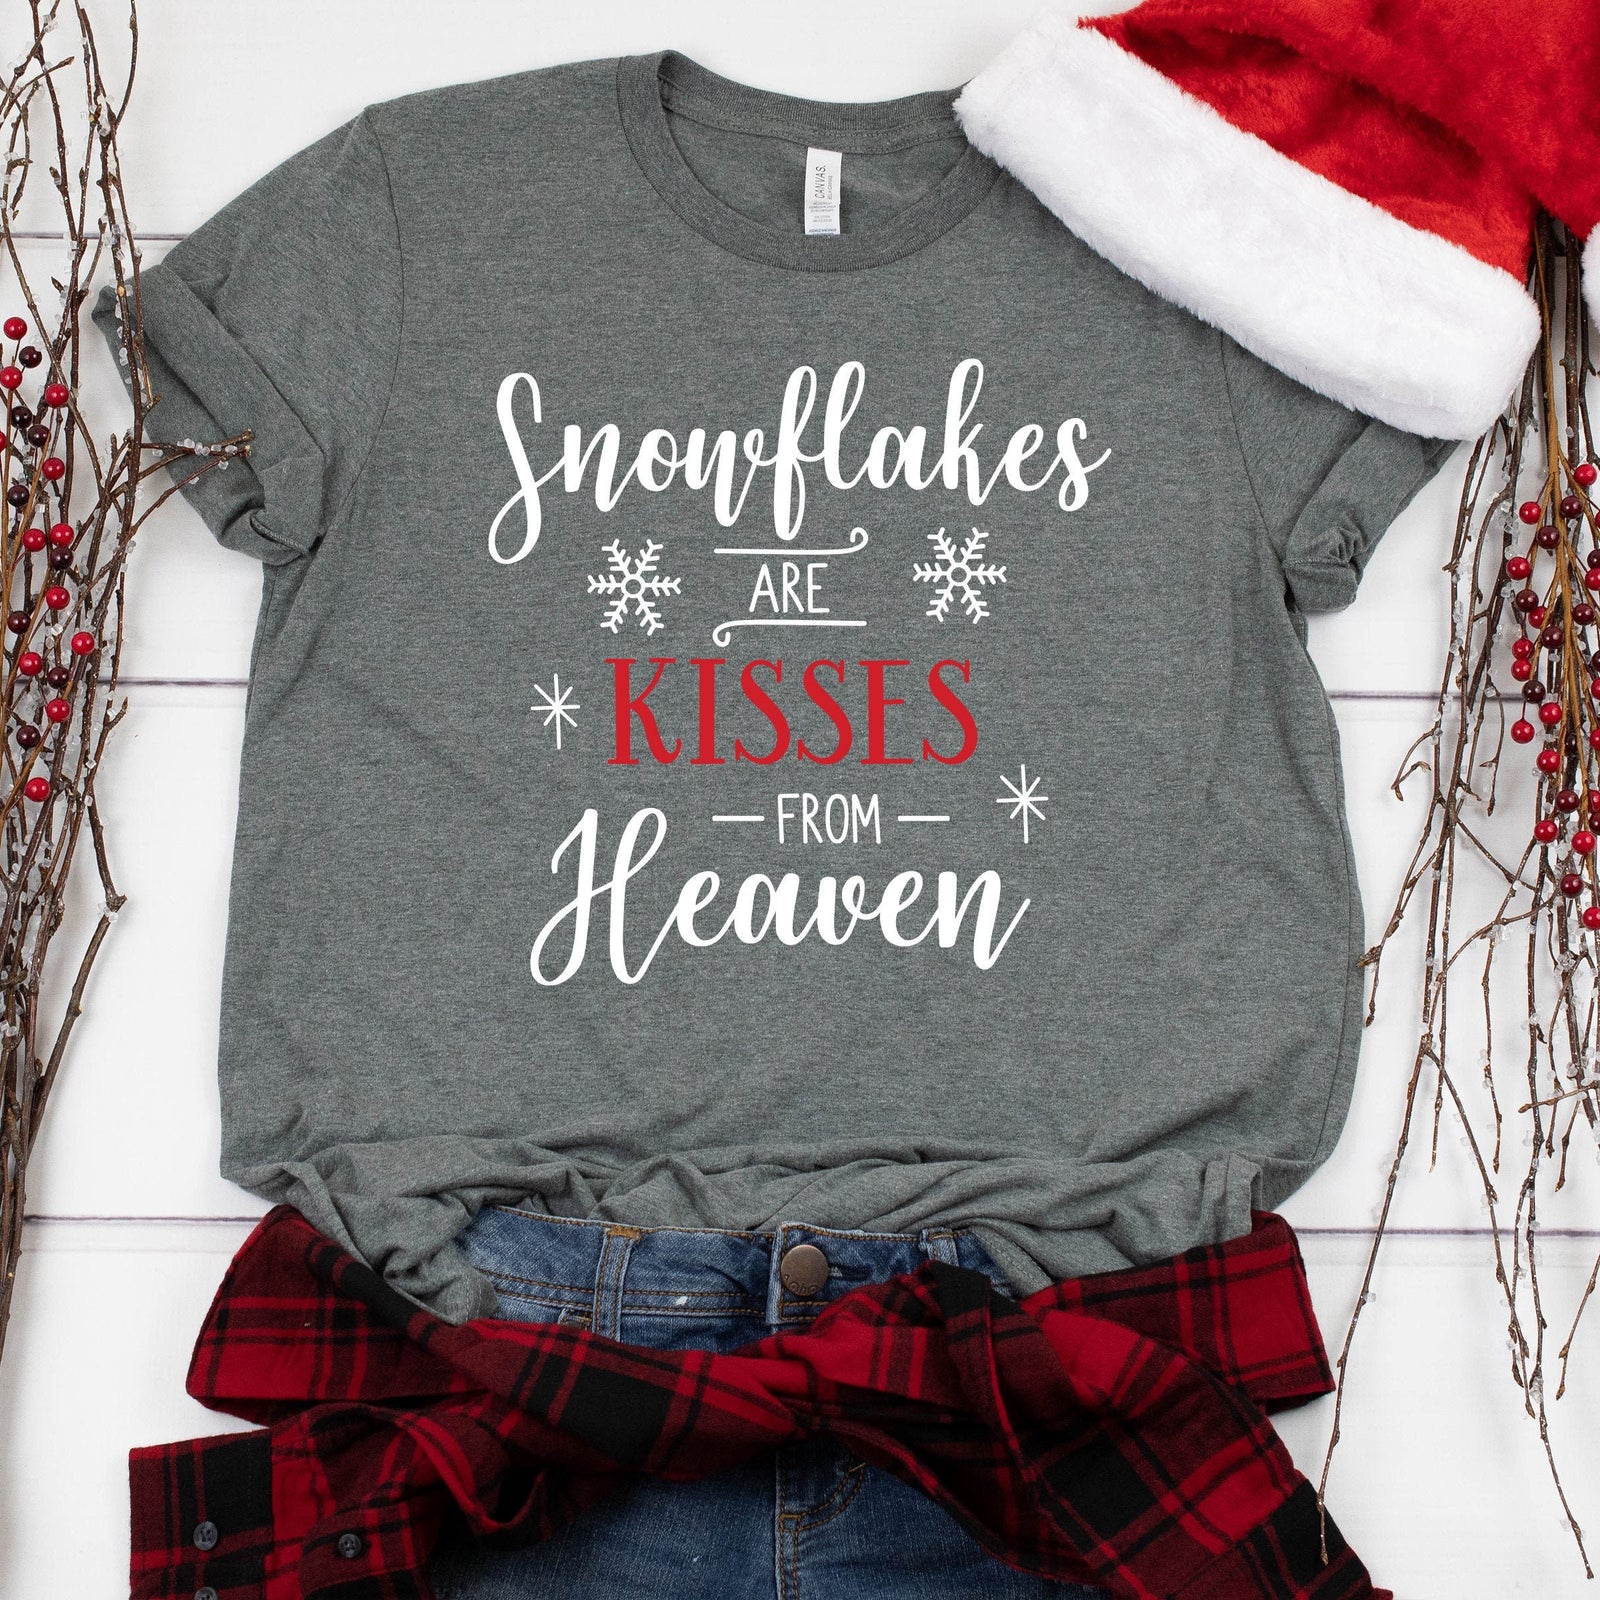 Snowflakes are Kisses from Heaven Christmas T Shirt - Snowflakes Holiday Shirt - Christmas Matching Shirt - Winter Christmas Shirt